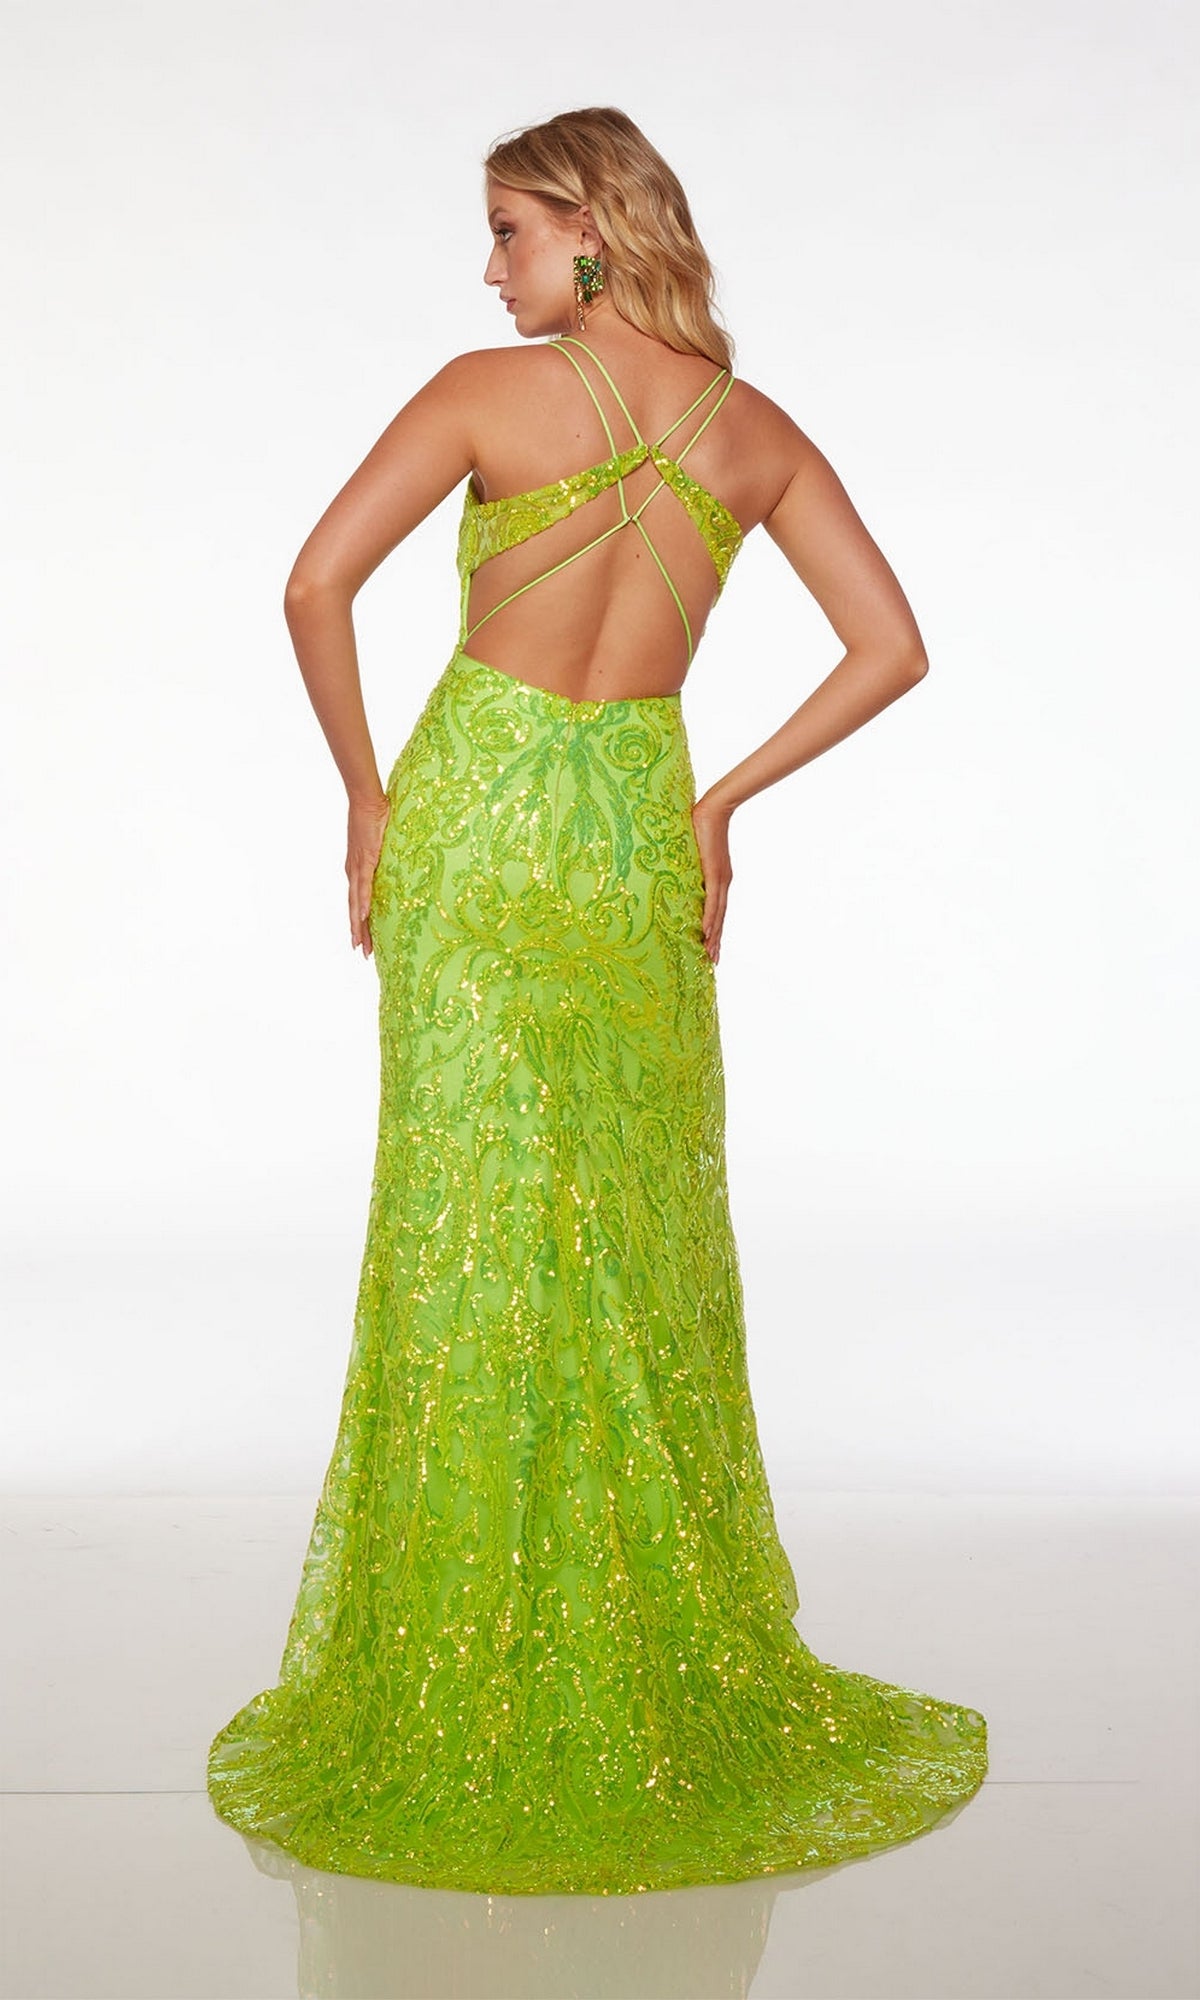 Alyce Open-Back Sequin-Print Prom Dress 61555